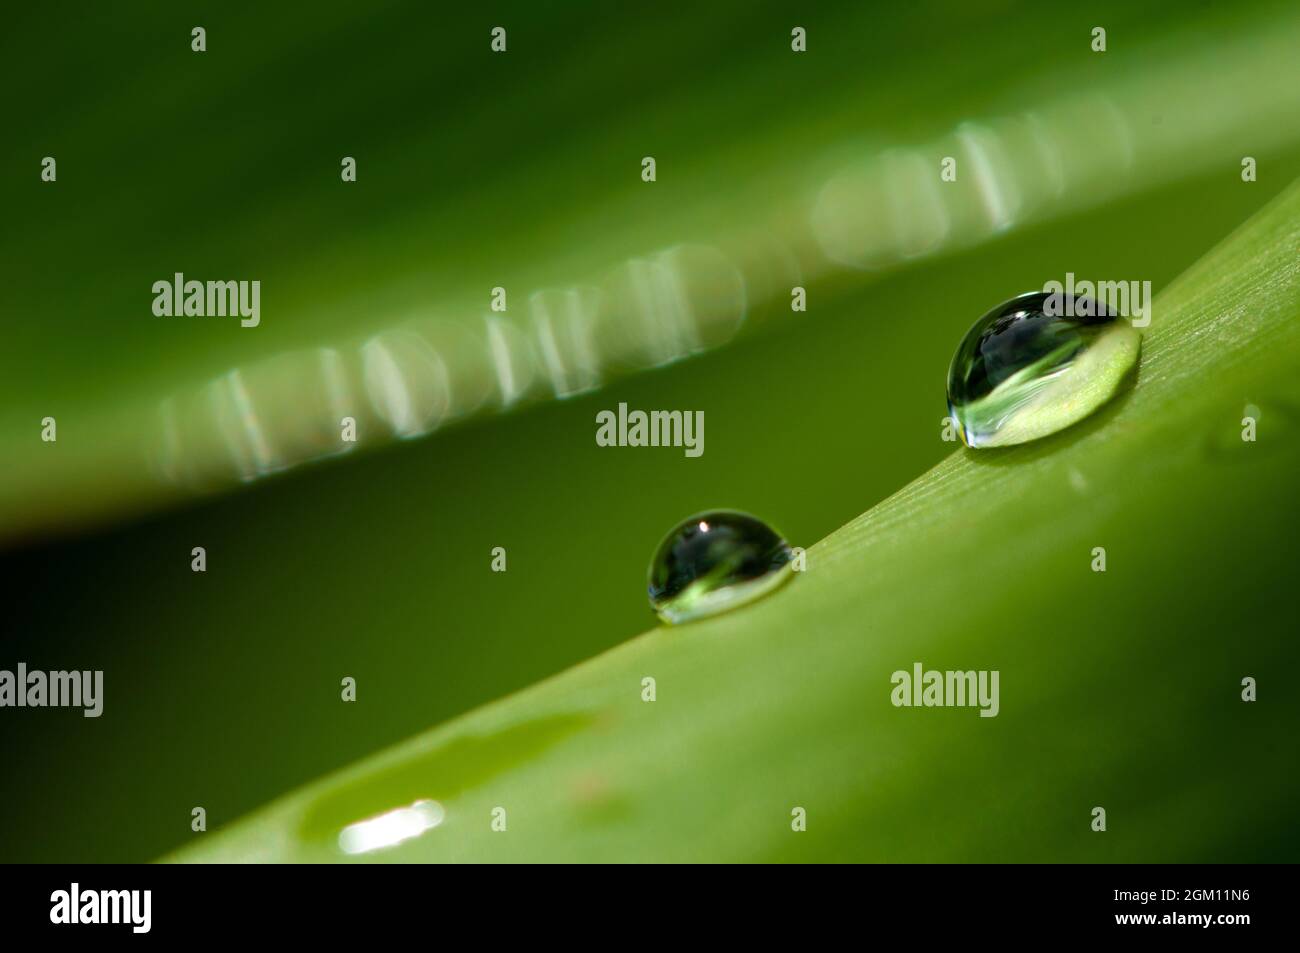 Water drops on green leaf. Stock Photo